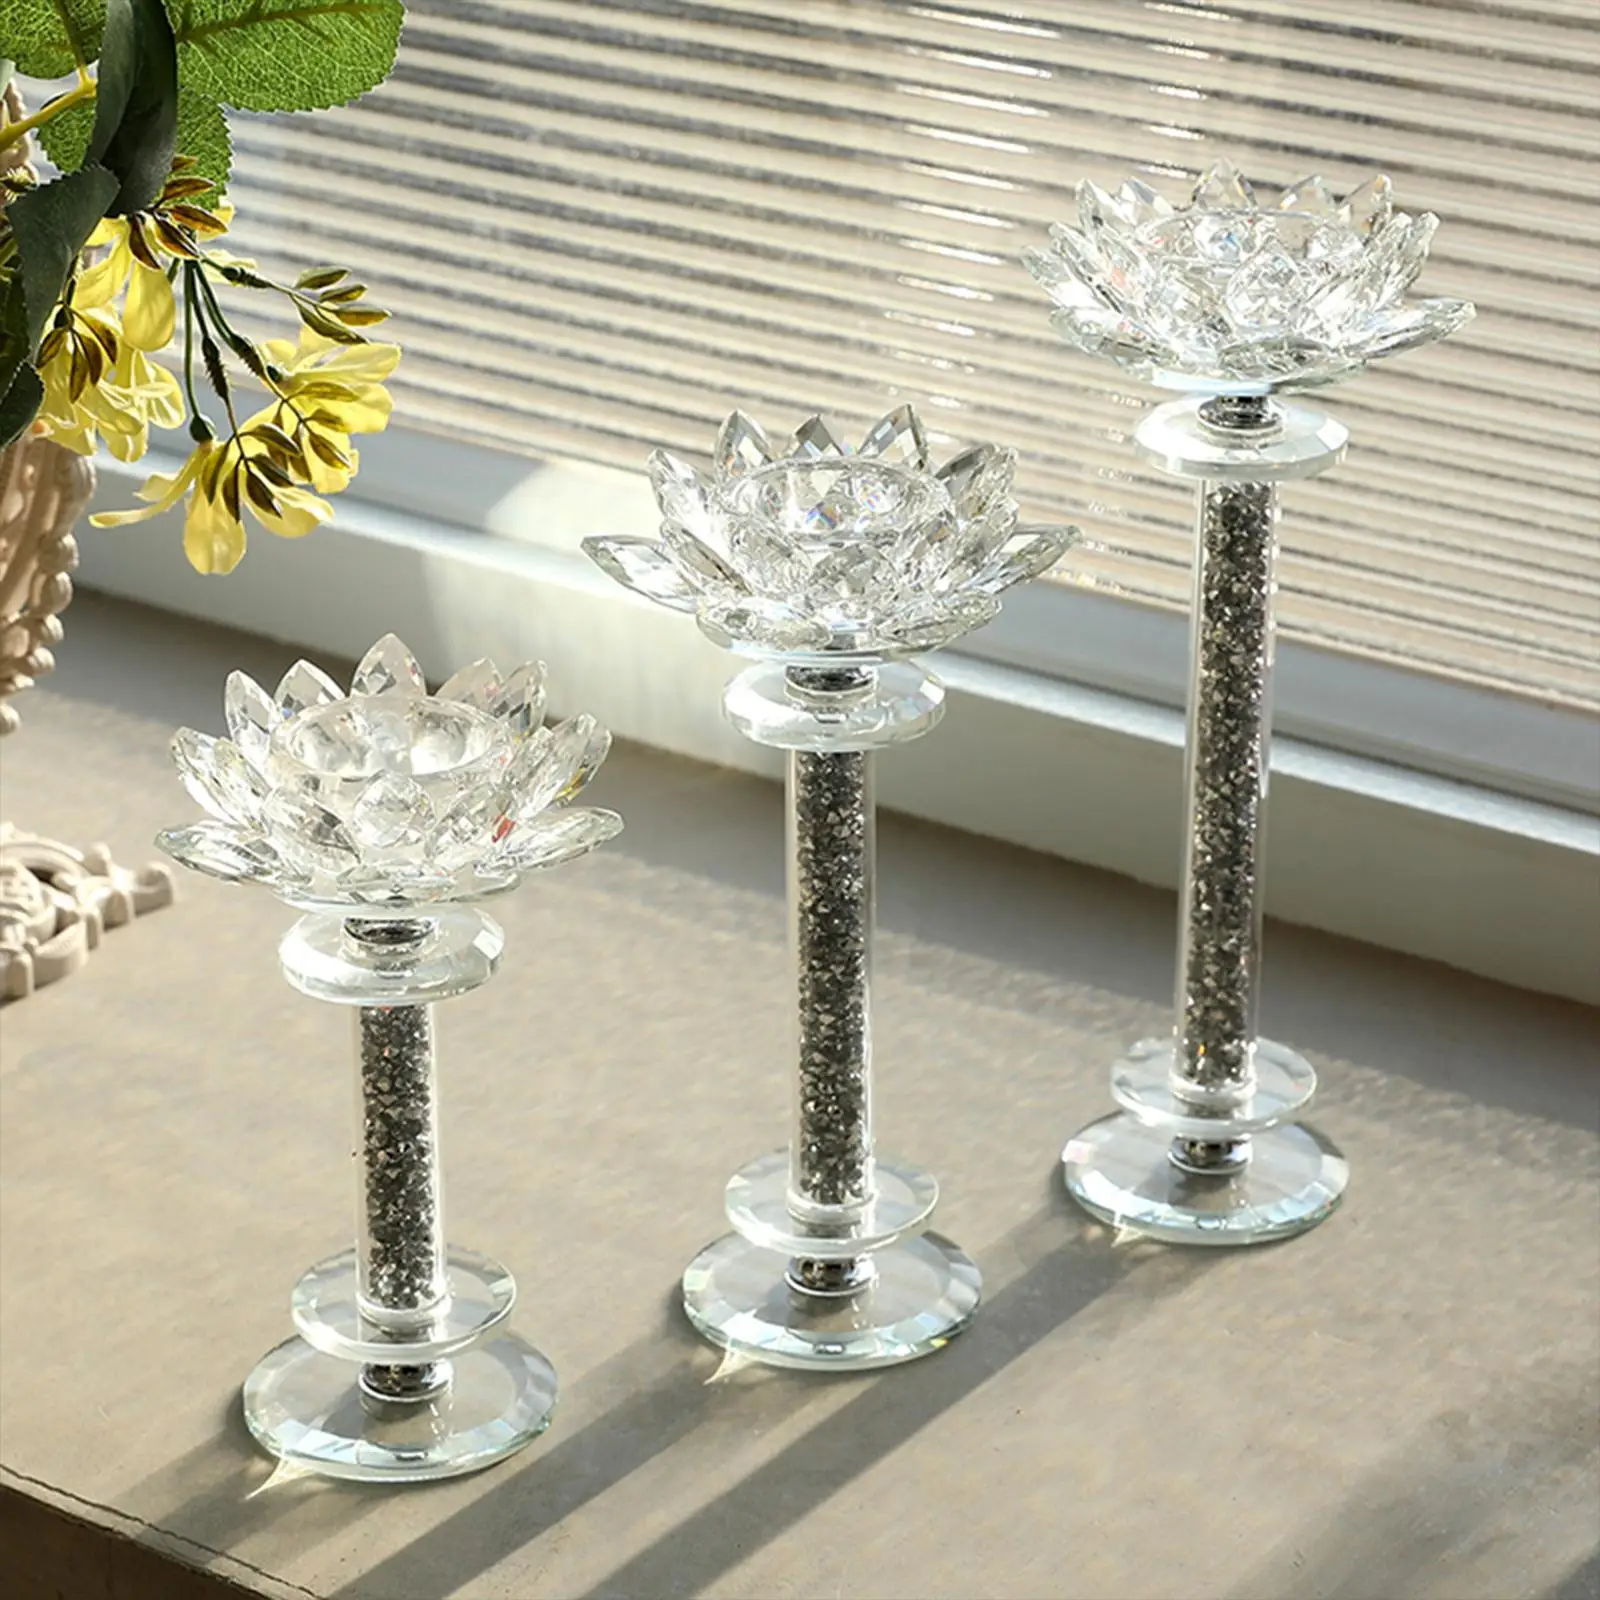 3 Pieces Clear Glass Lotus Flower Candle Holder Pillar Candlestick Romantic Tea Light Holders for Tabletop Dining Room Decor